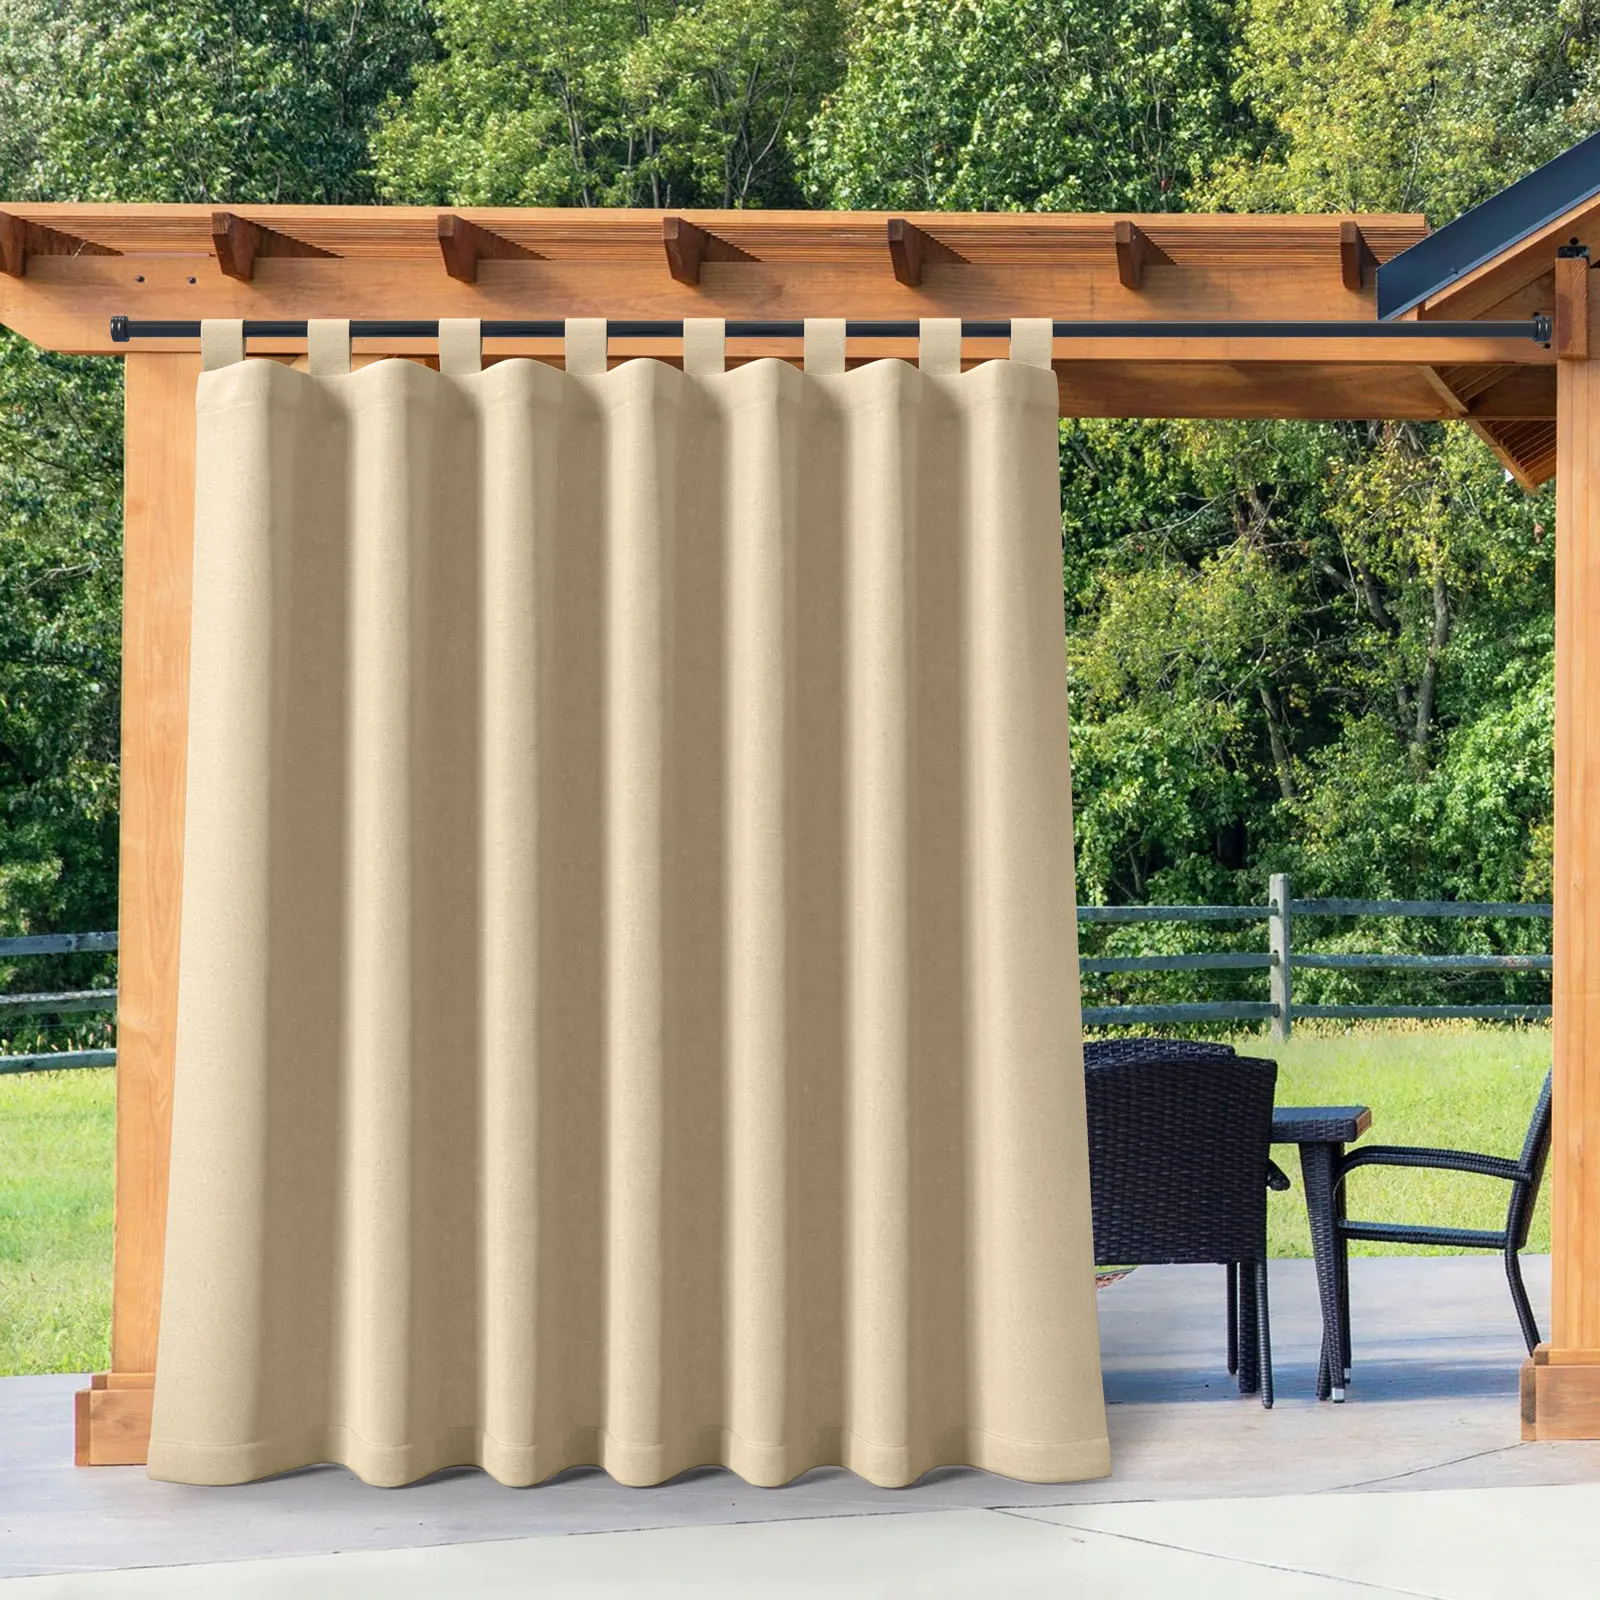 Outdoor Waterproof Patio Curtains Tab Top Blackout Panels for French Door Porch Pergola, Privacy Screen, Beige